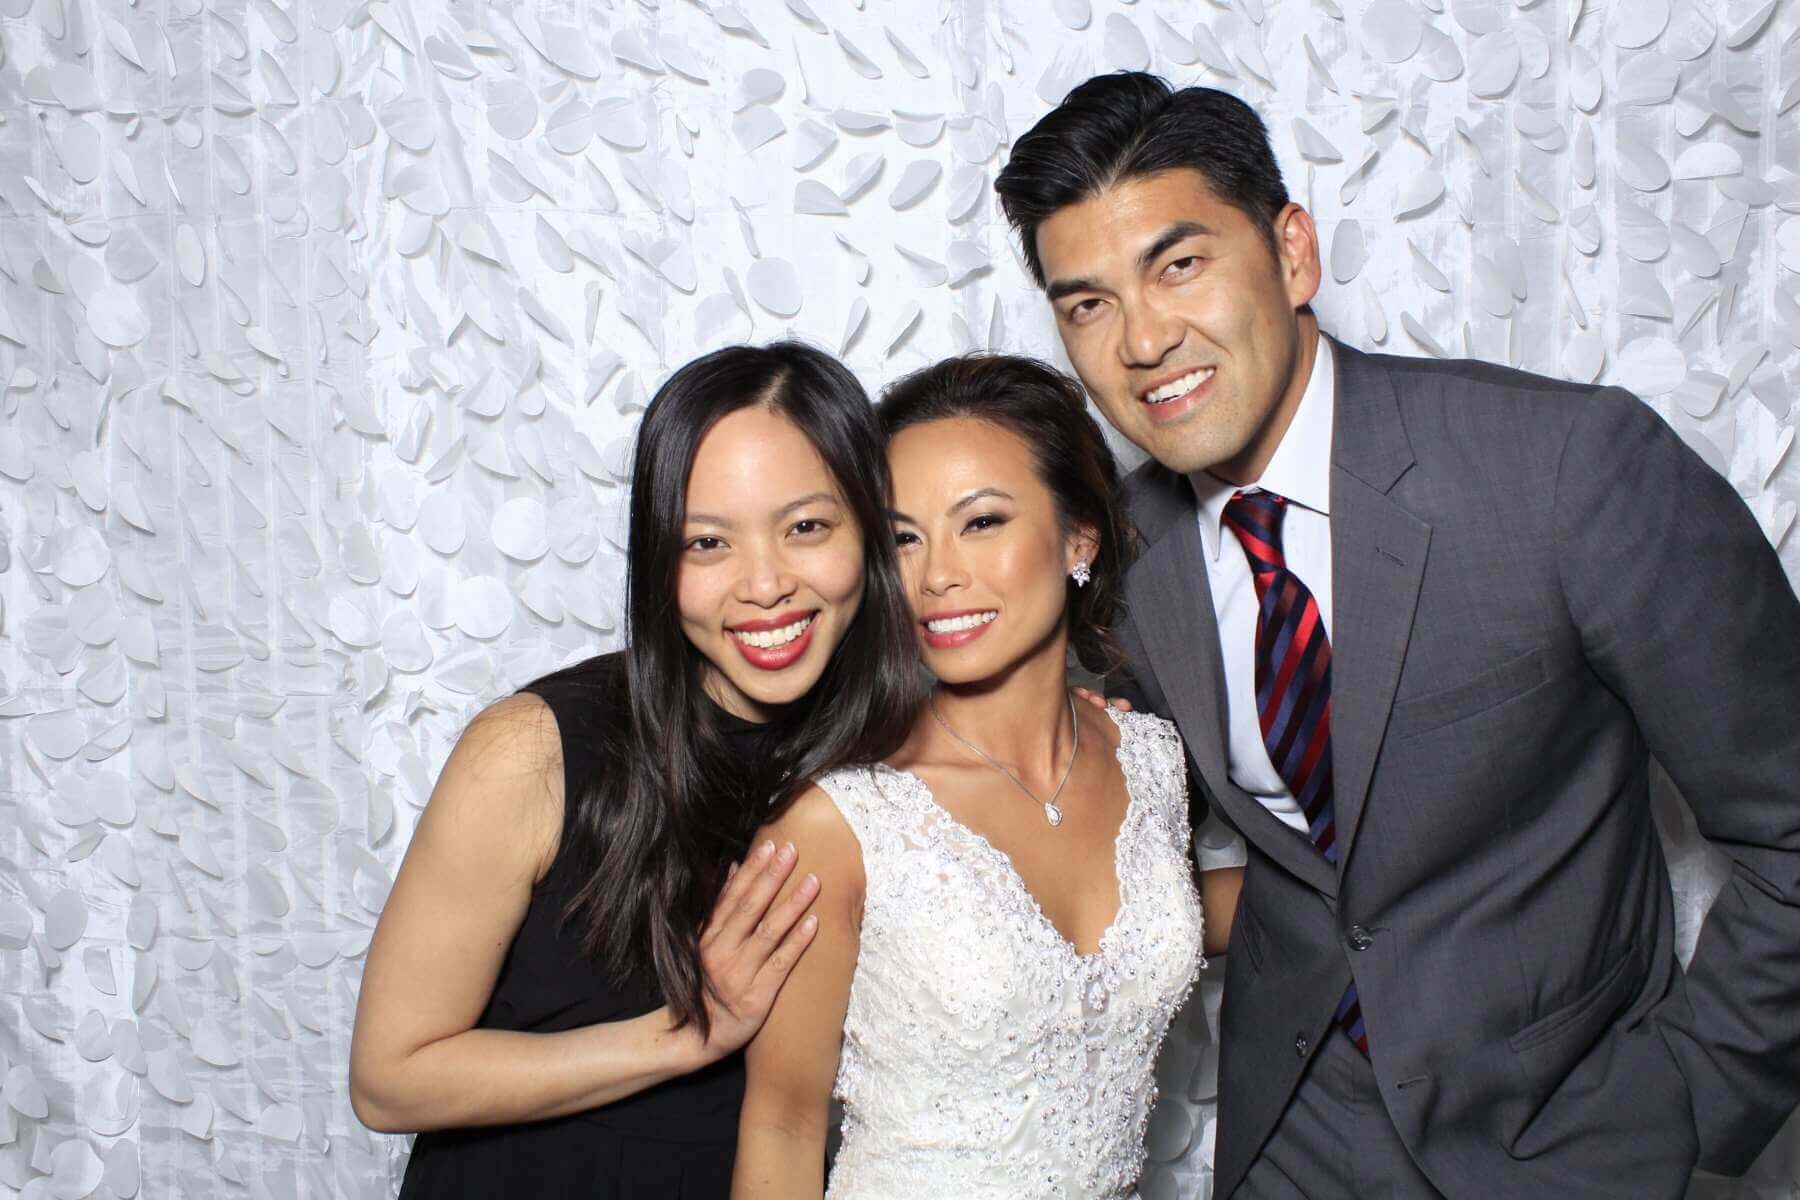 Photo booth rental in Toronto for an event. Posing in front of a beautiful white petal backdrop offered by LOL Photo Booth. Tags: Event planning ideas, Photo booth prints, high resolution photos, Toronto photo booth rental services. GIFS, Boomerangs, Mosaic Walls, Slow motion, brand activation.